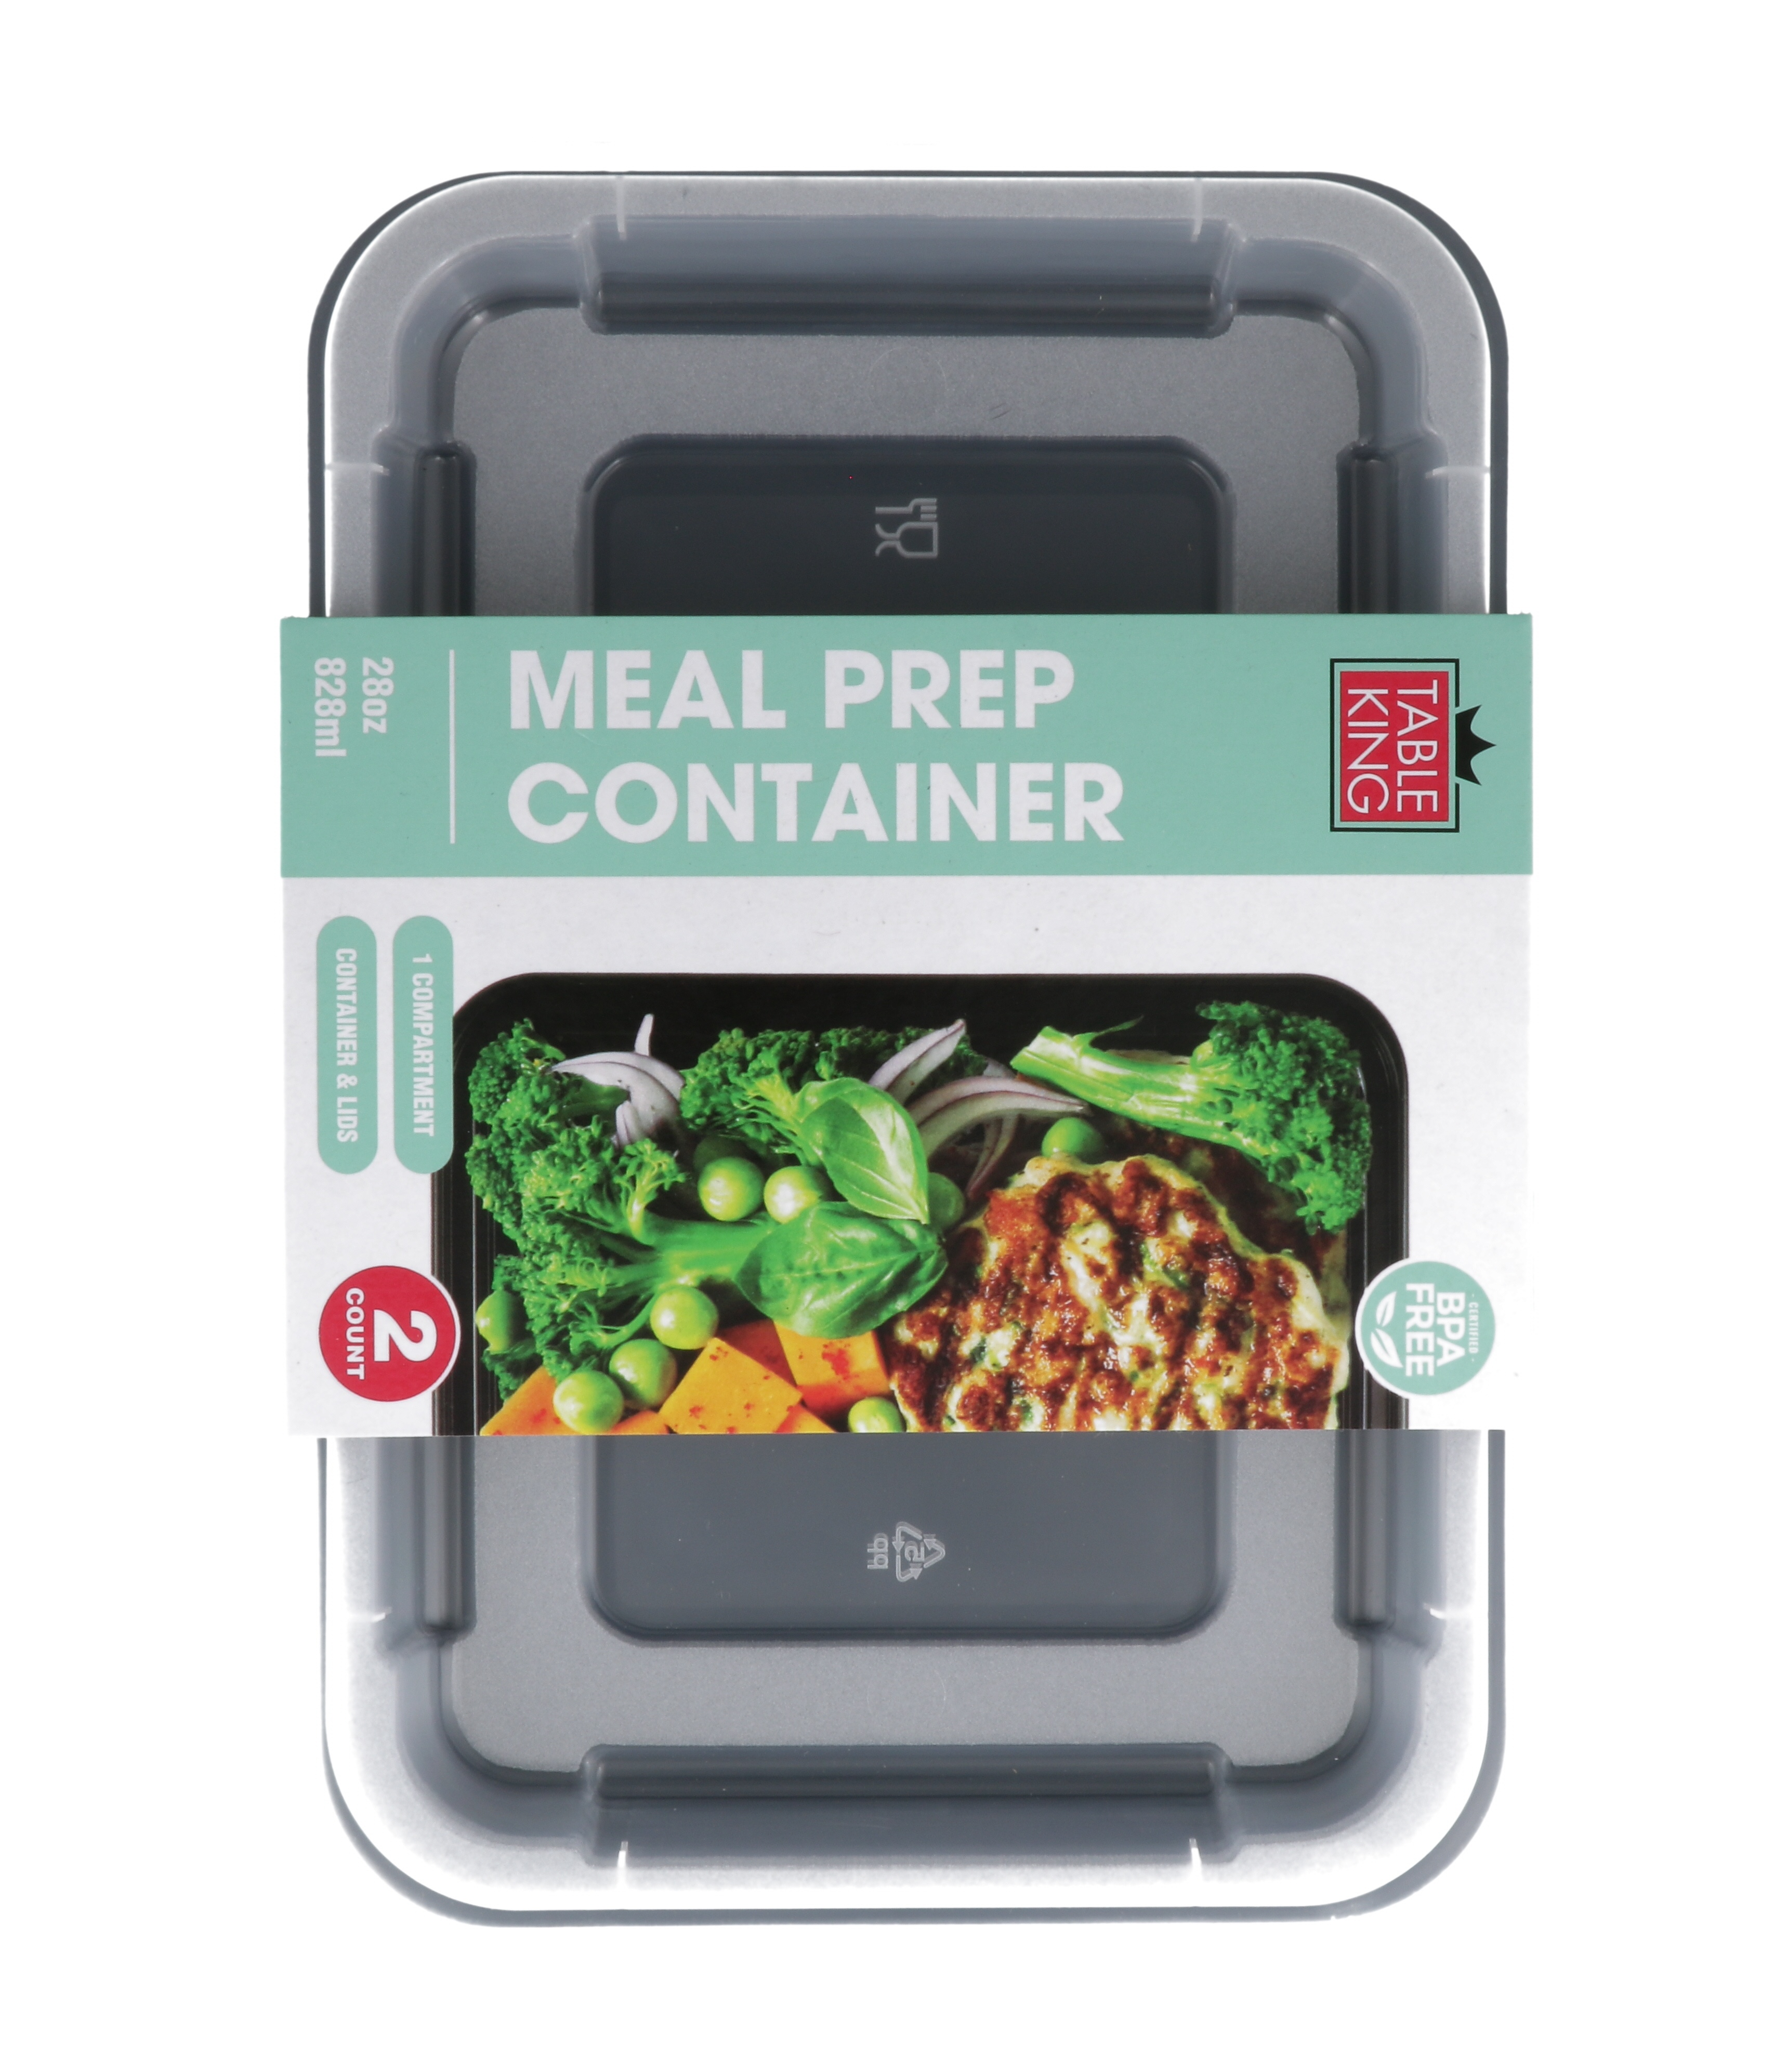 TABLE KING MEAL PREP CONTAINER RECTANGLE 28 OZ